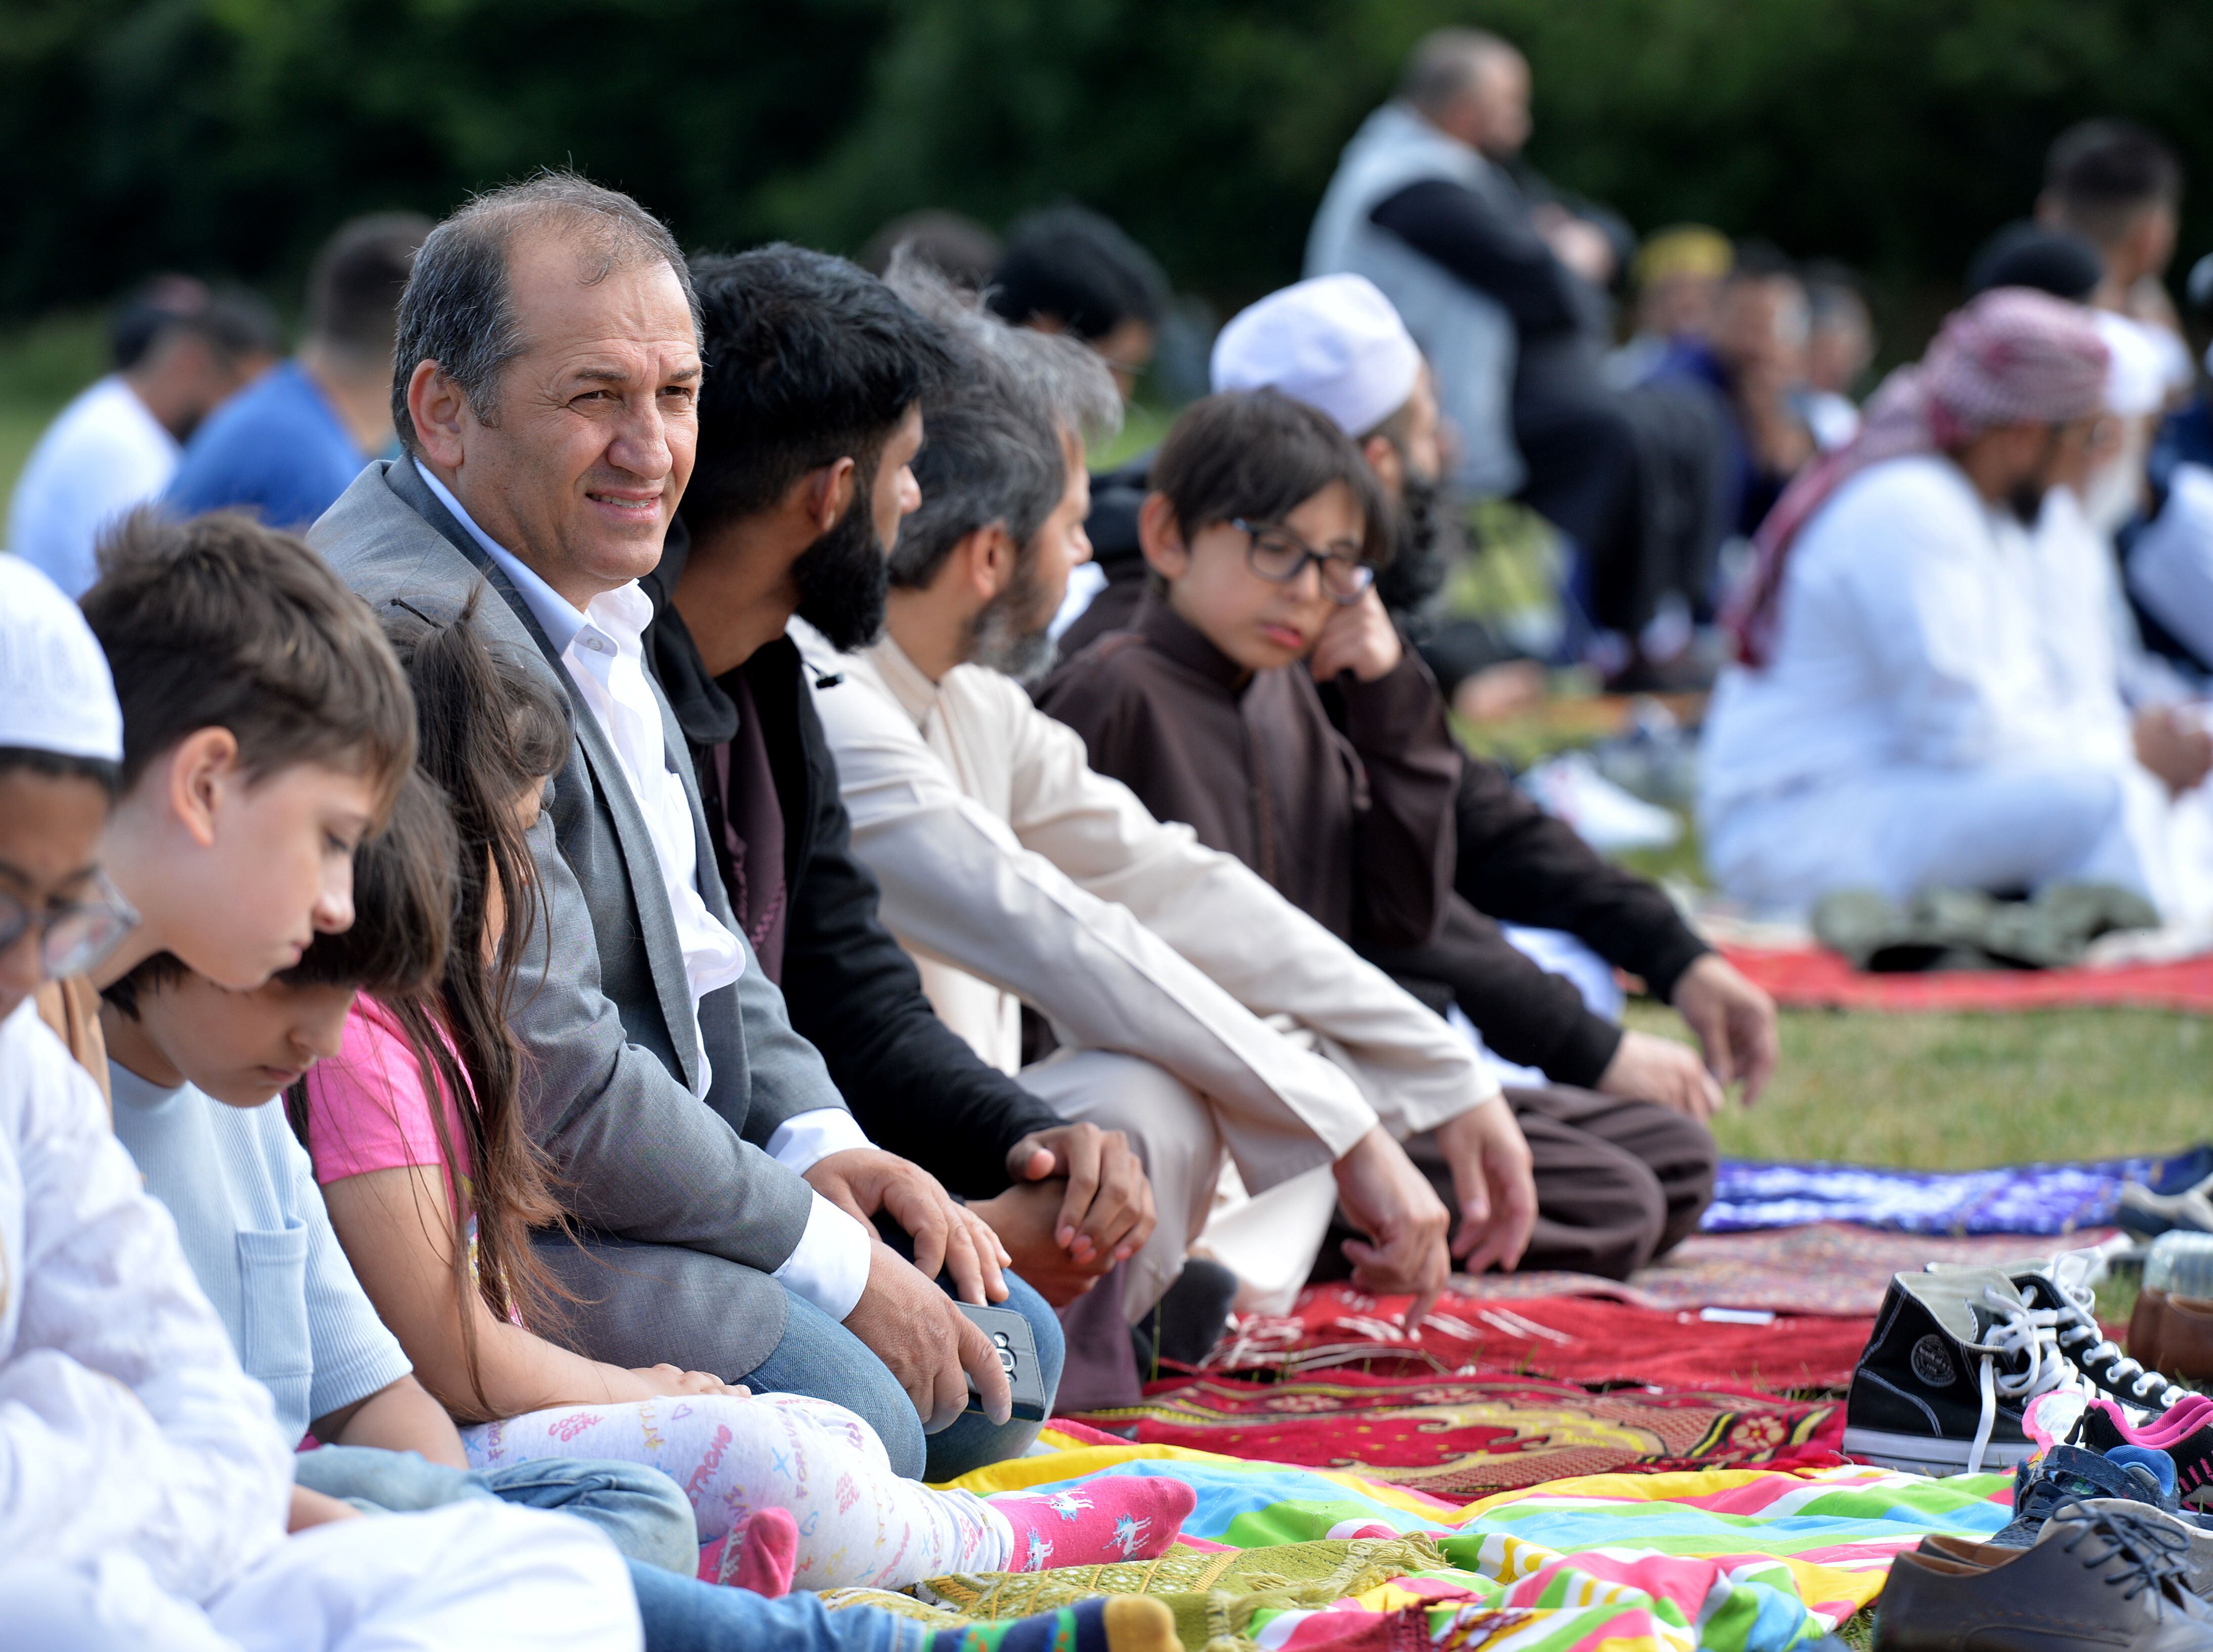 Thousands descend on Walsall for Eid in the Park event